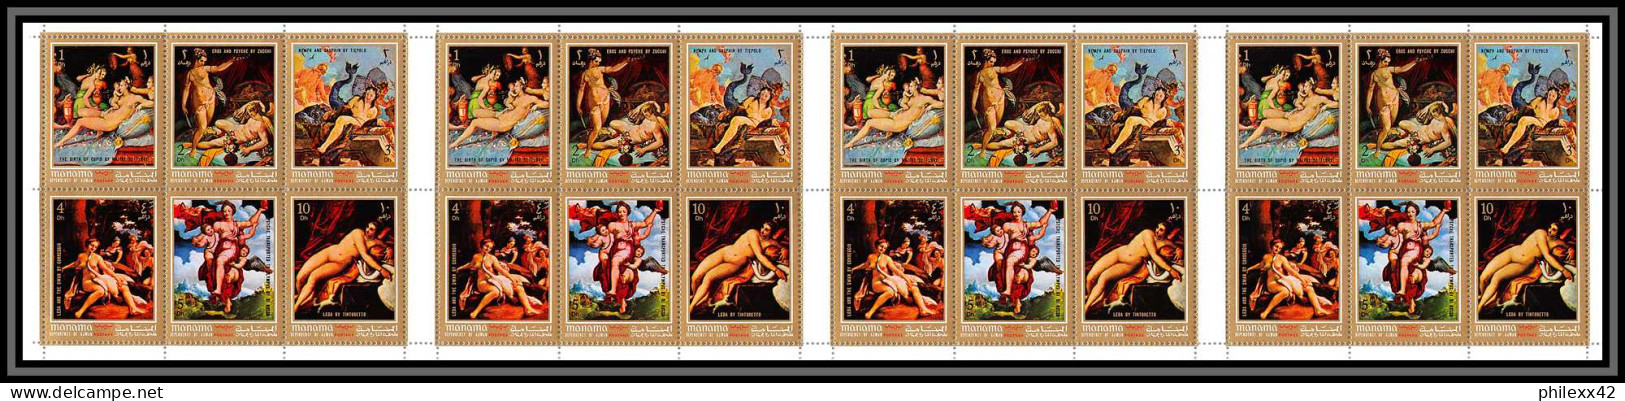 Manama - 3163f/ N° 600/607 A  Greek Mythology Tableau (Painting) Feuille Complete (sheet) RRR Discount - Desnudos